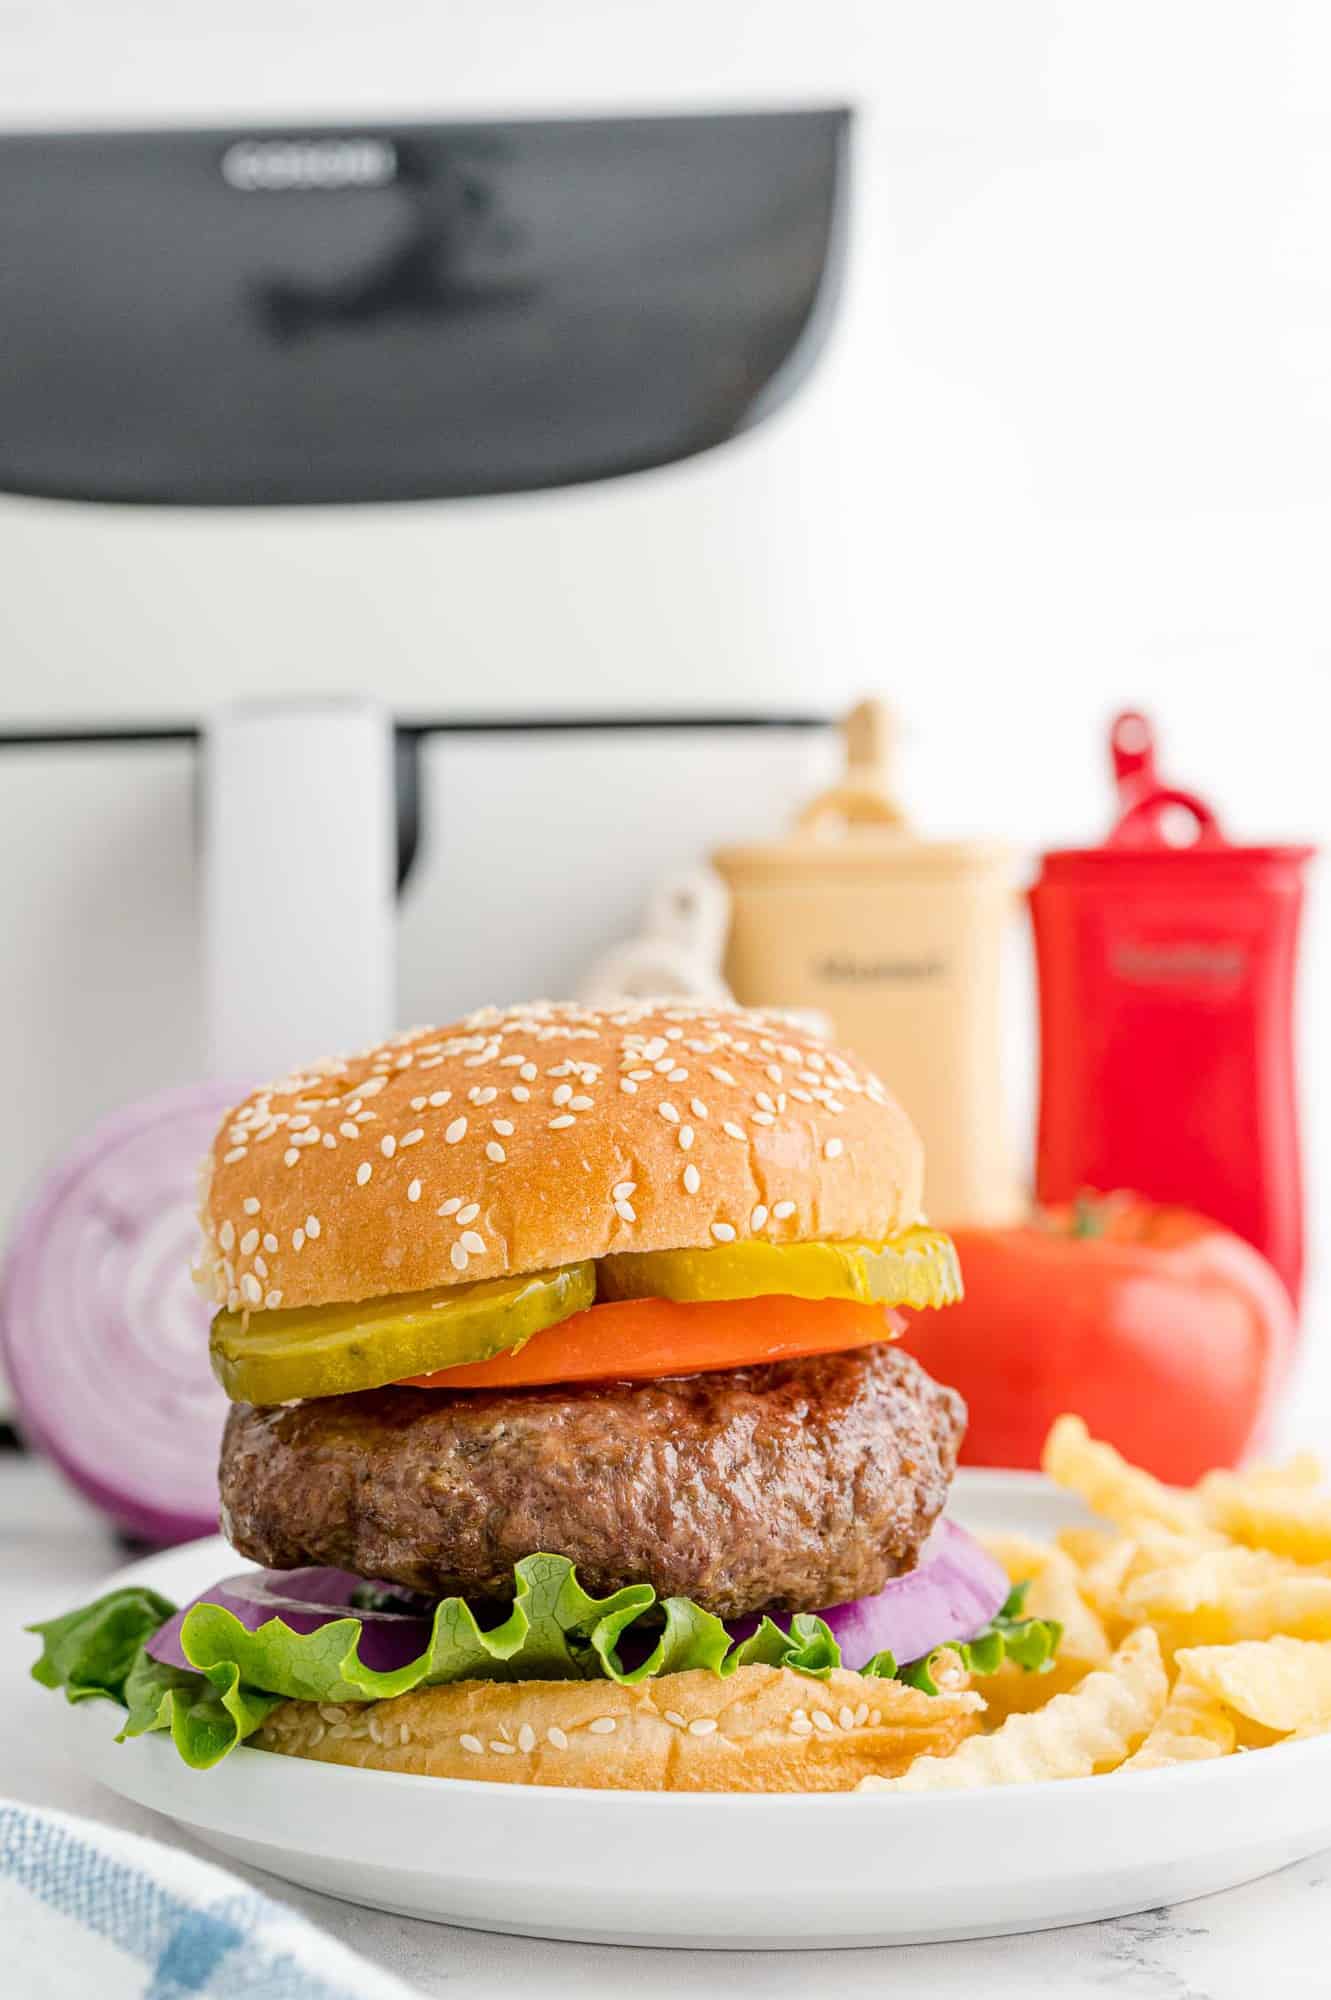 Burger with air fryer in background.